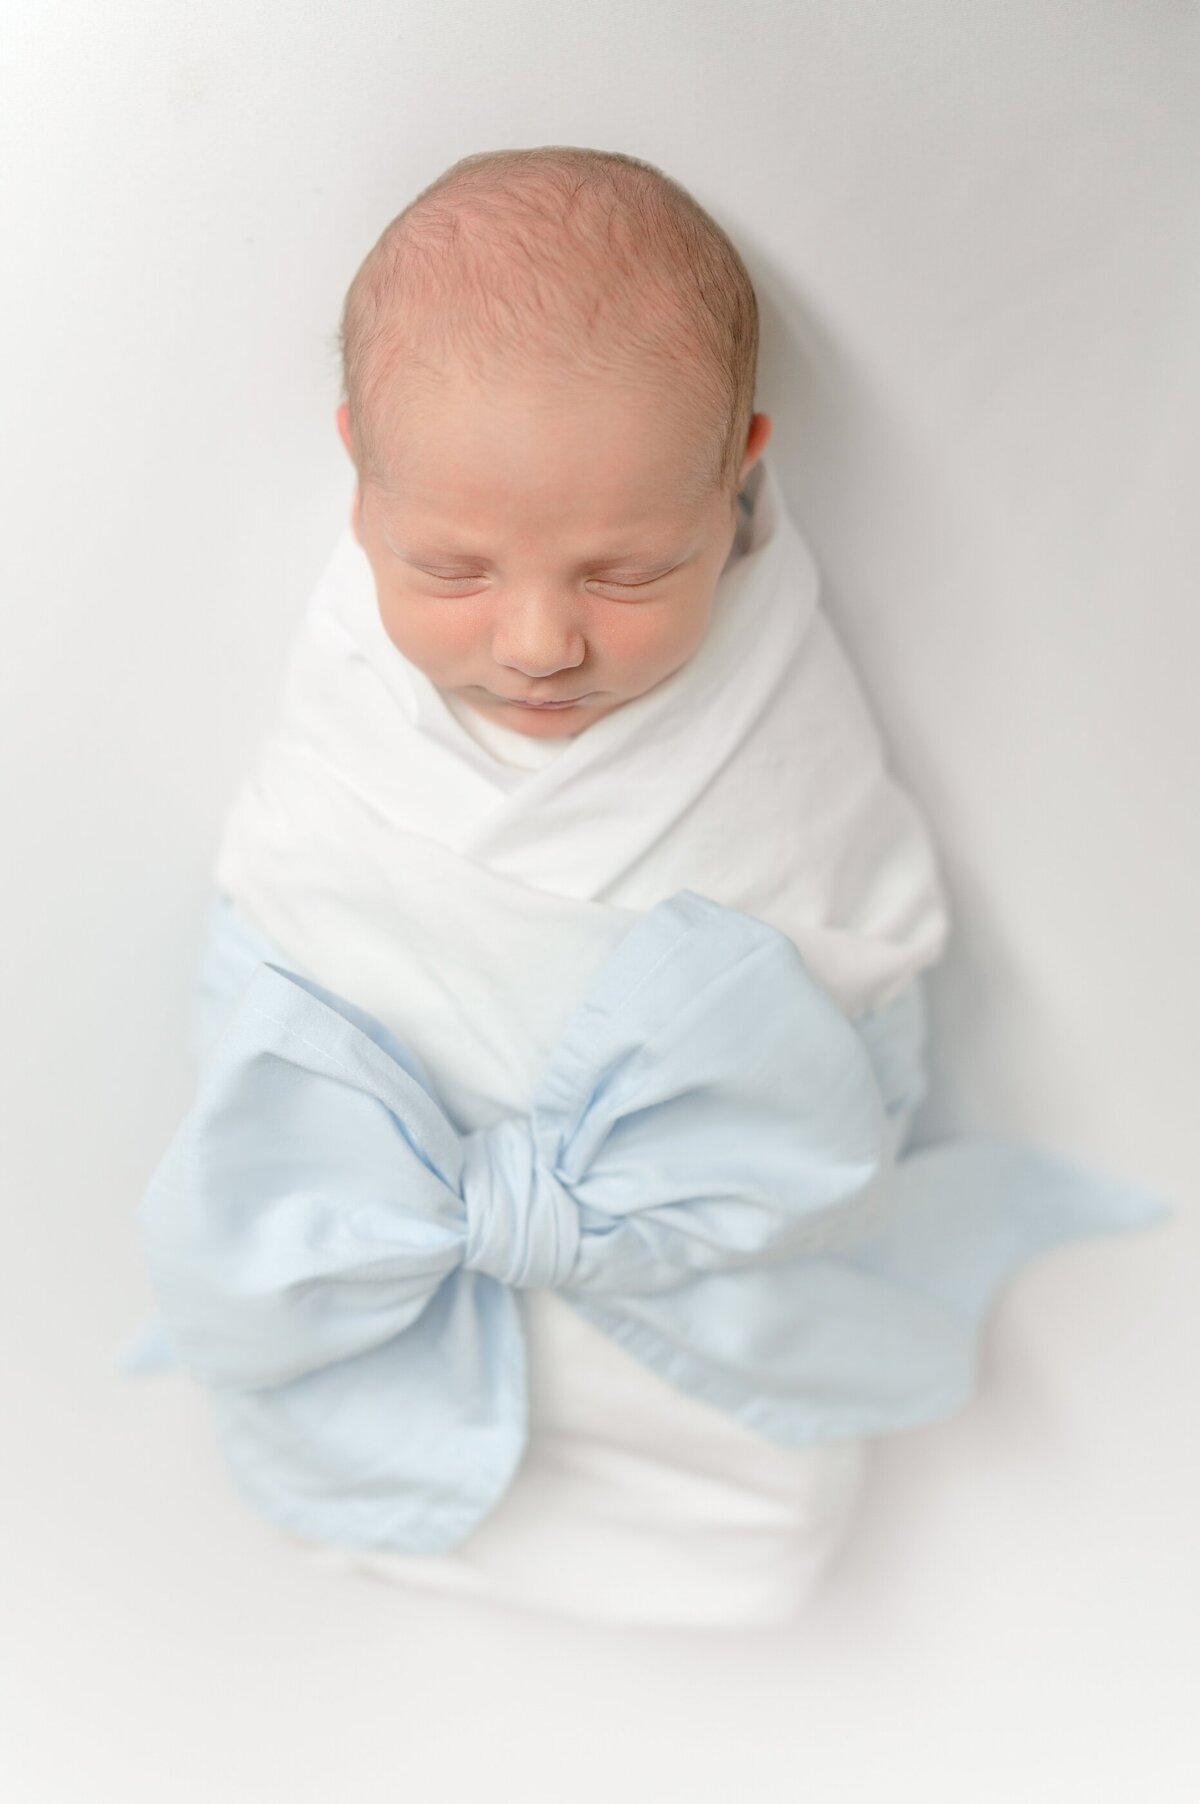 Baby swaddled in a blue bow wrap laying on a white blanket.